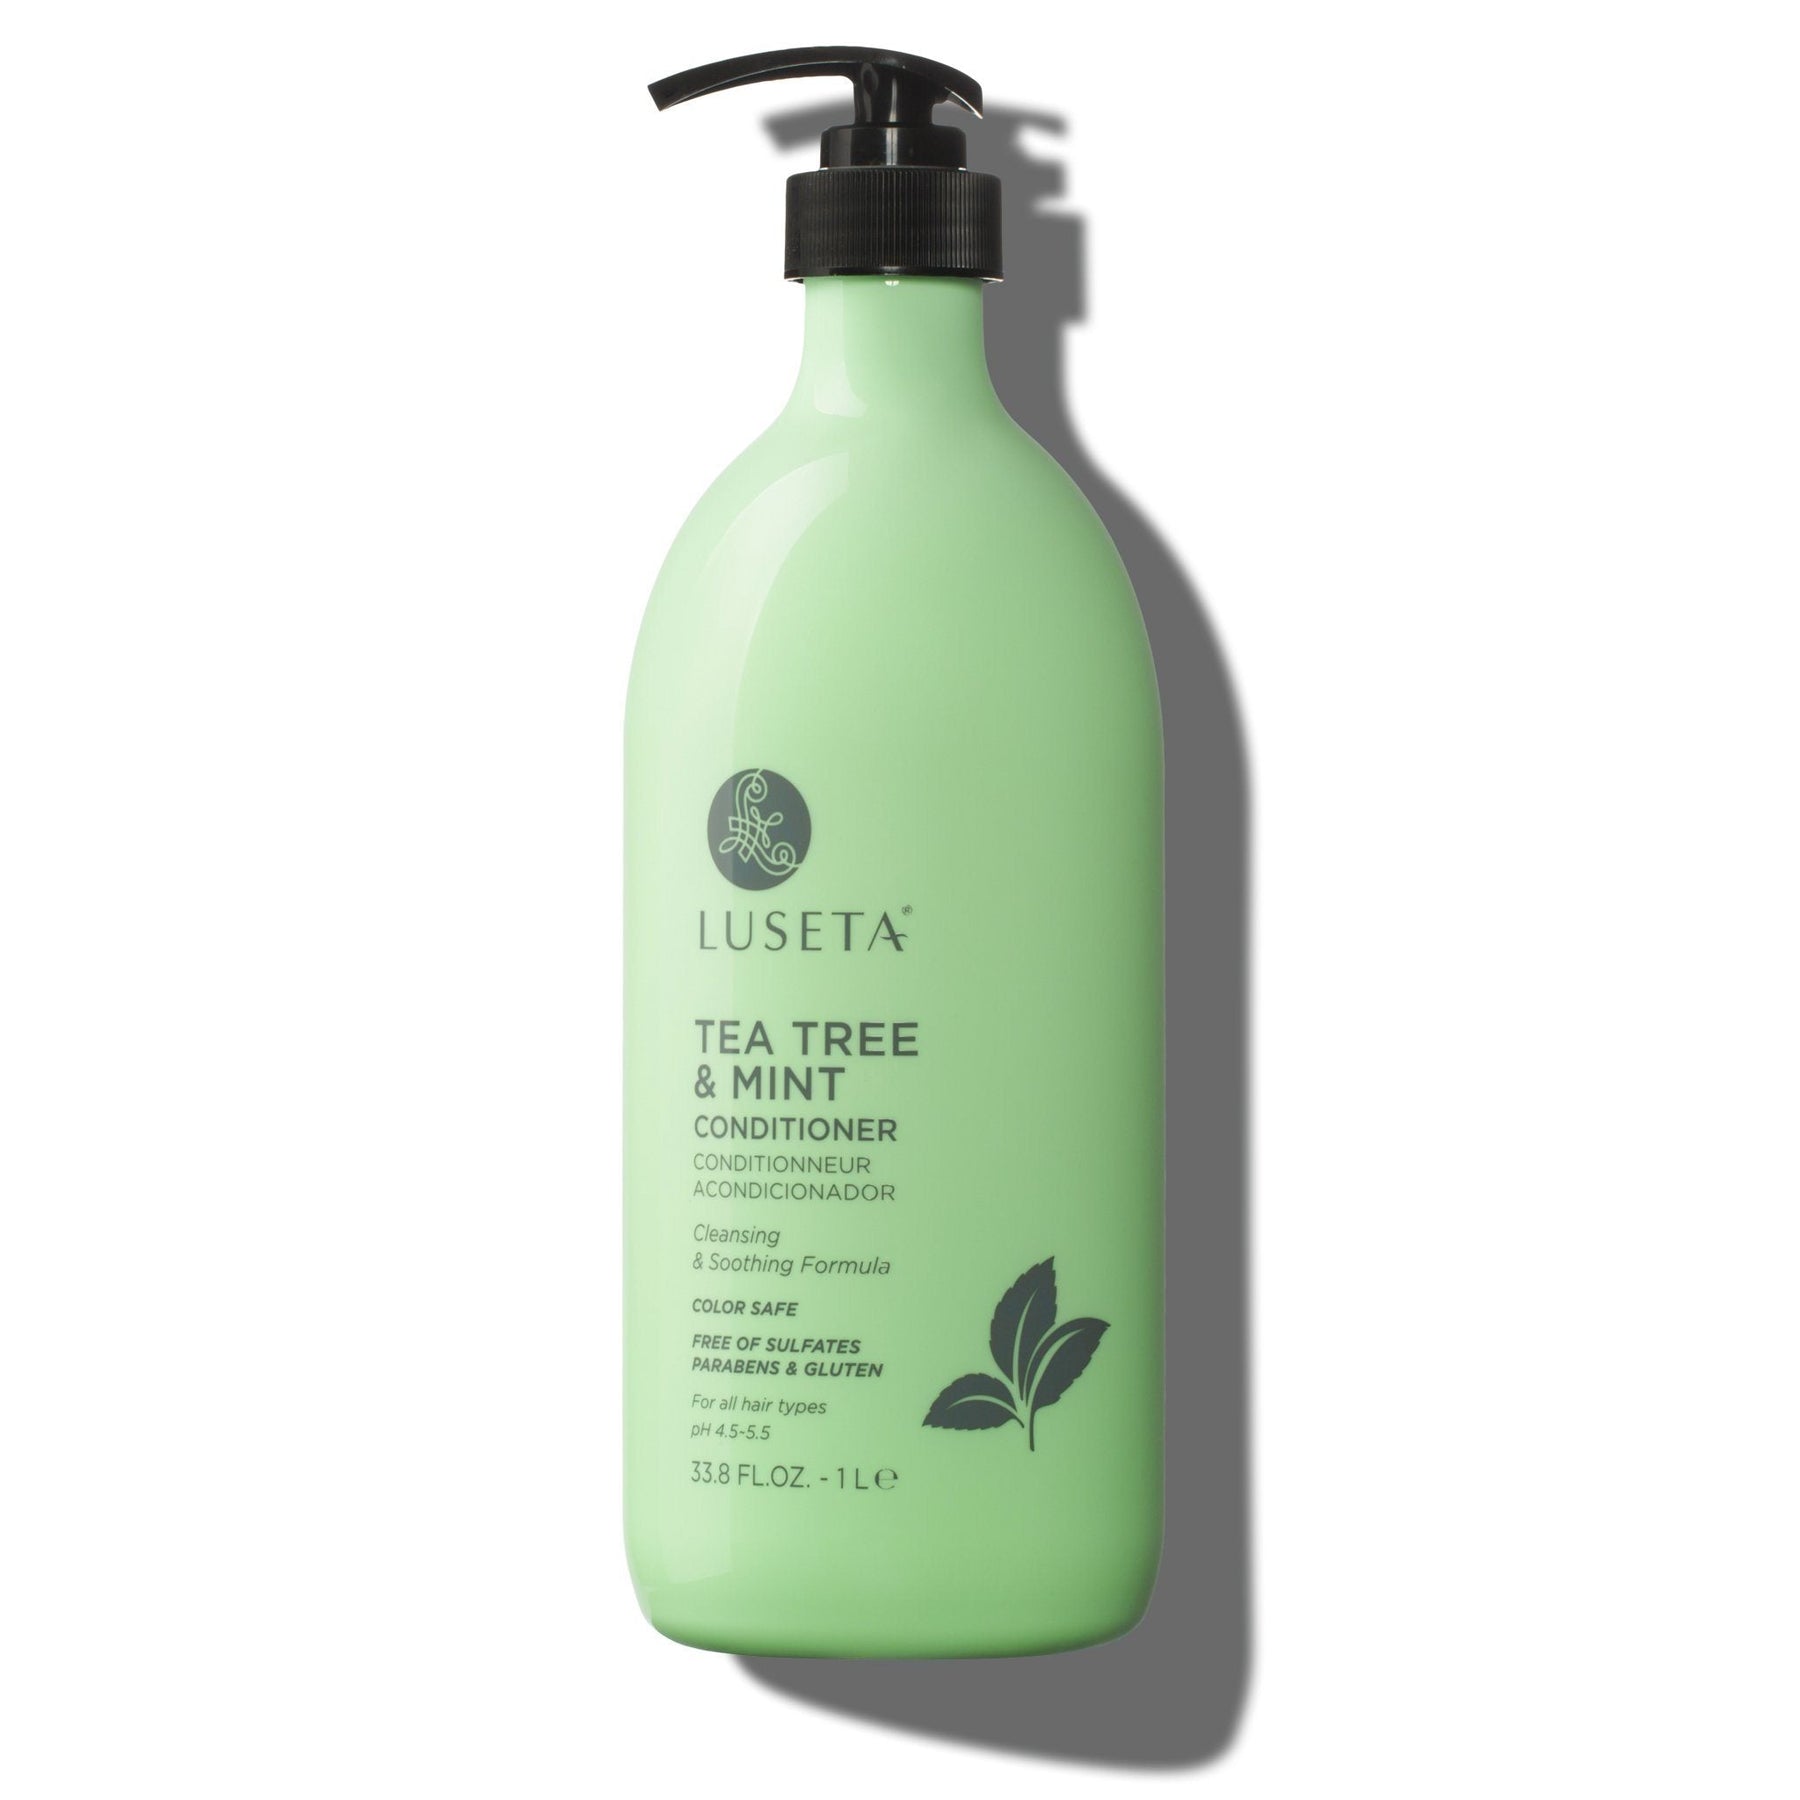 Tea Tree & Mint Conditioner - 33.8oz - by Luseta Beauty |ProCare Outlet|